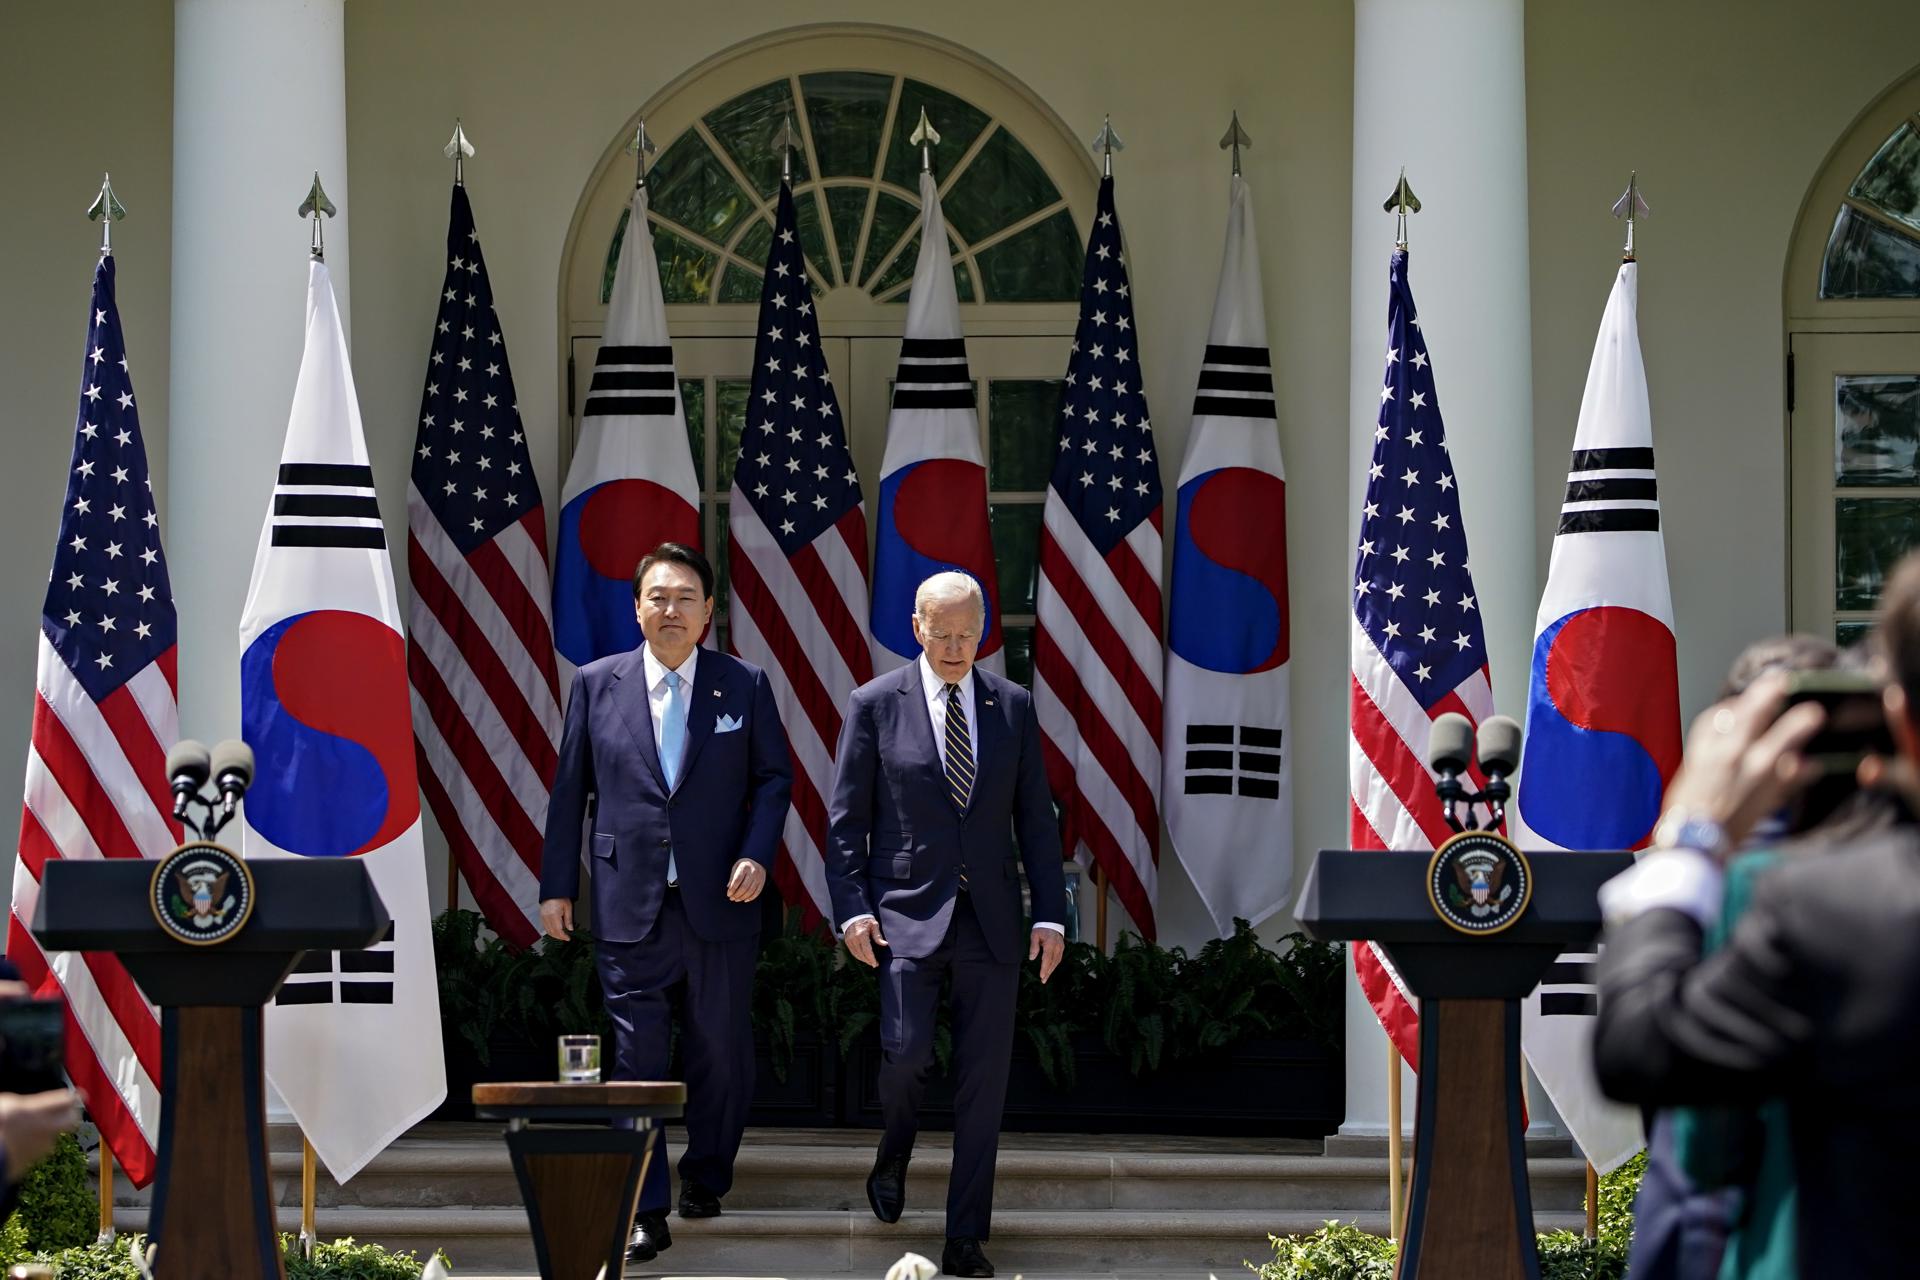 US President Joe Biden and South Korean counterpart Yoon Suk-yeol hold a joint press conference at the White House in Washington on 26 April 2023. EE/EPA/AL DRAGO/ POOL
